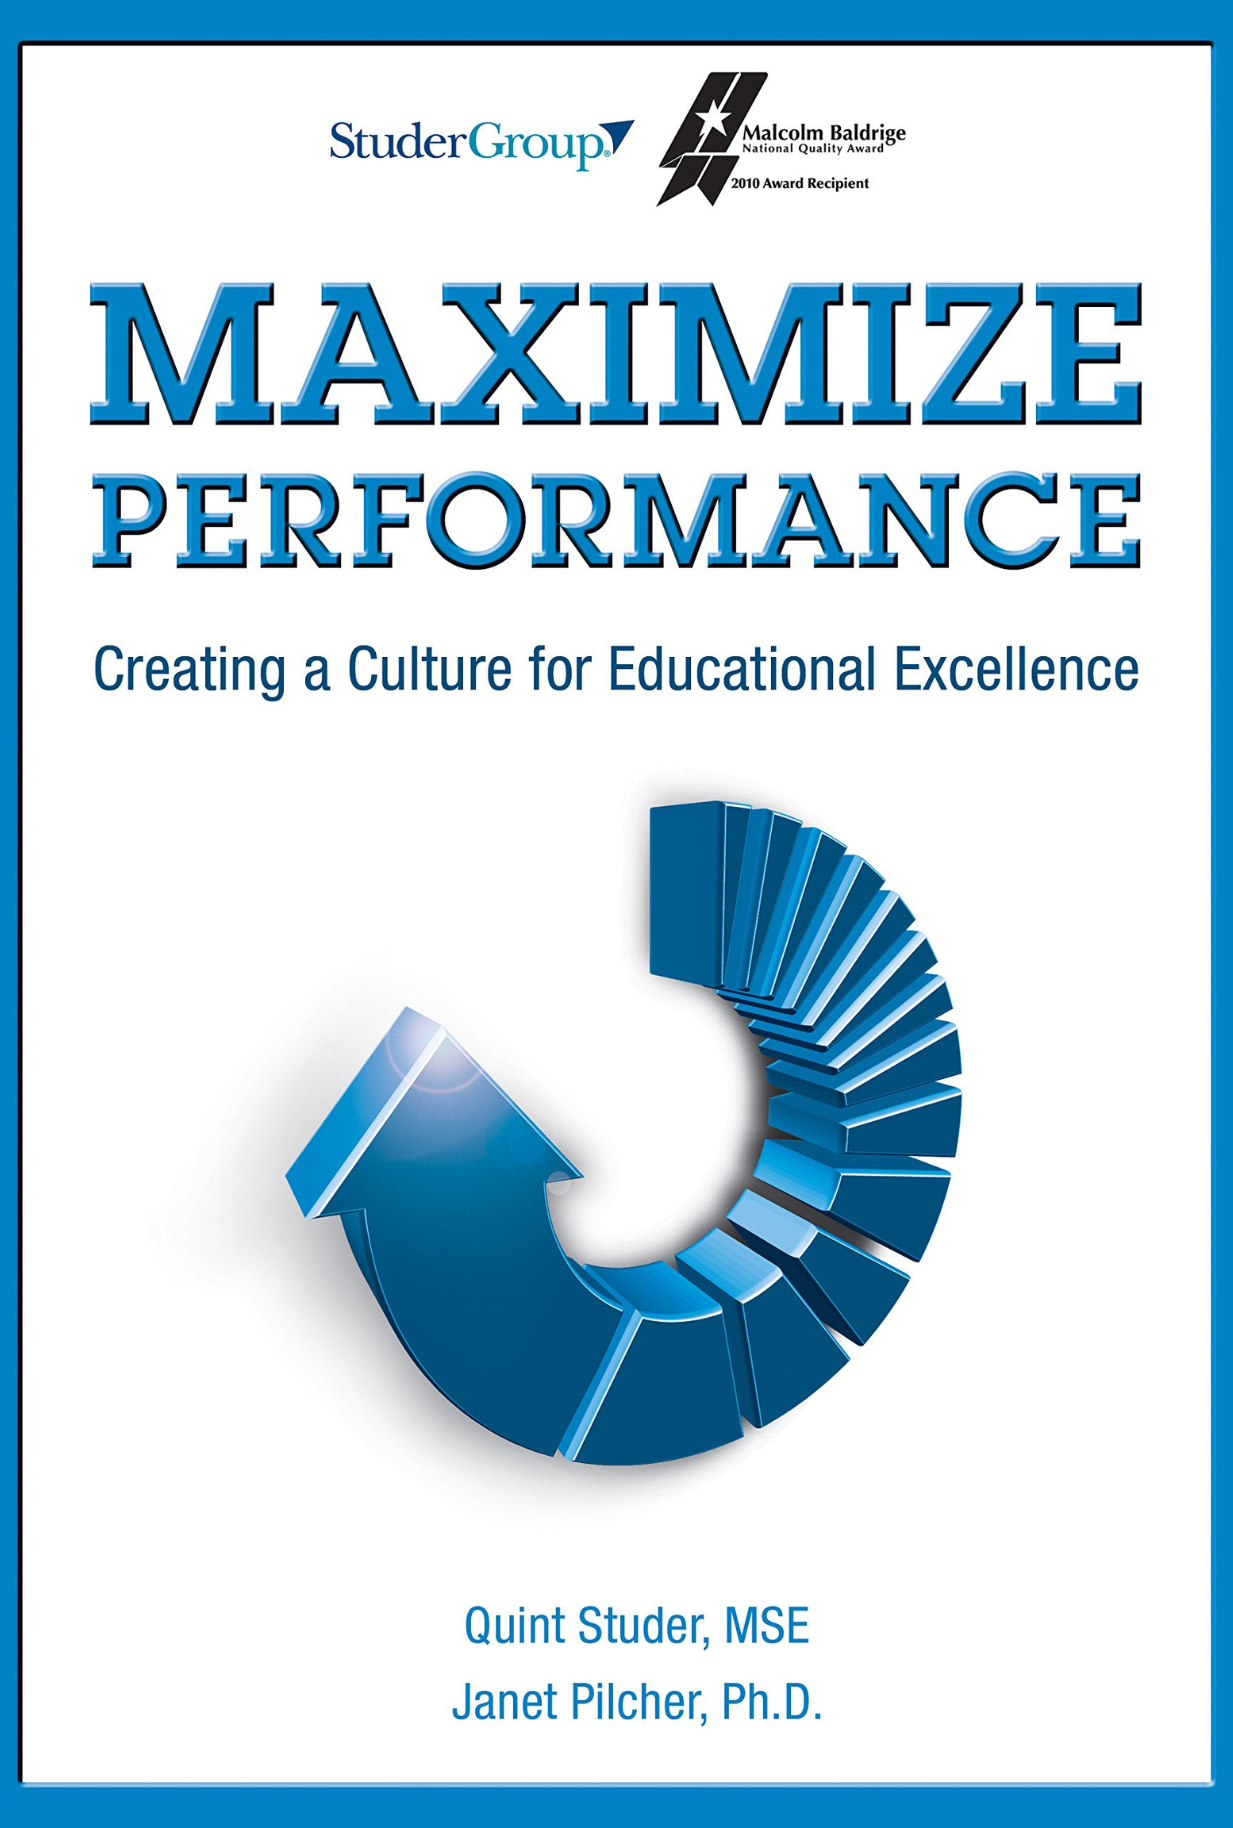 Maximize Performance by Quint Studer